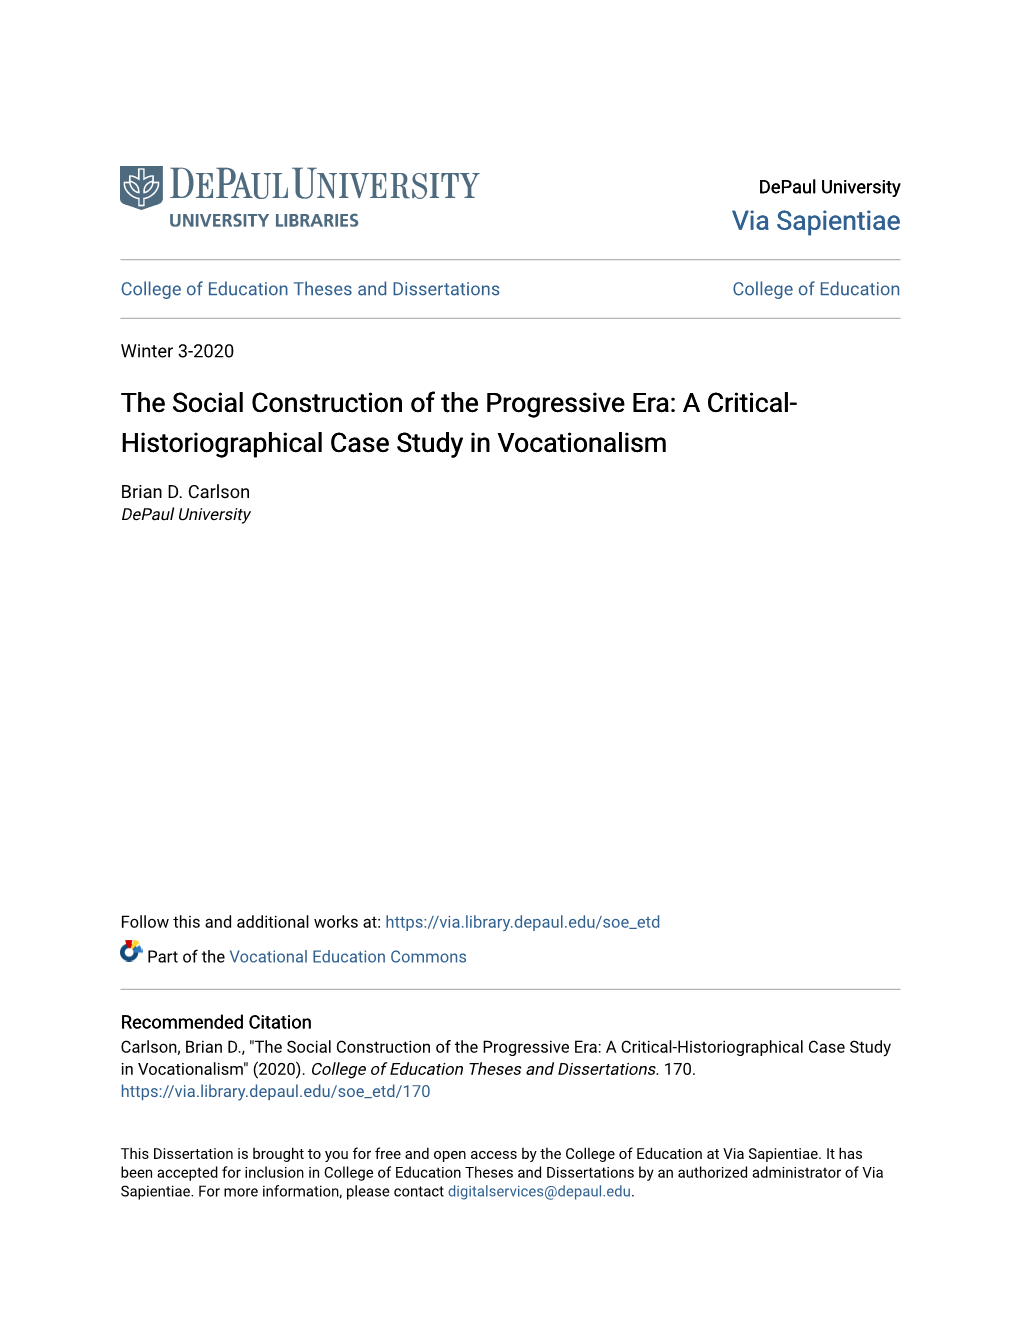 The Social Construction of the Progressive Era: a Critical- Historiographical Case Study in Vocationalism